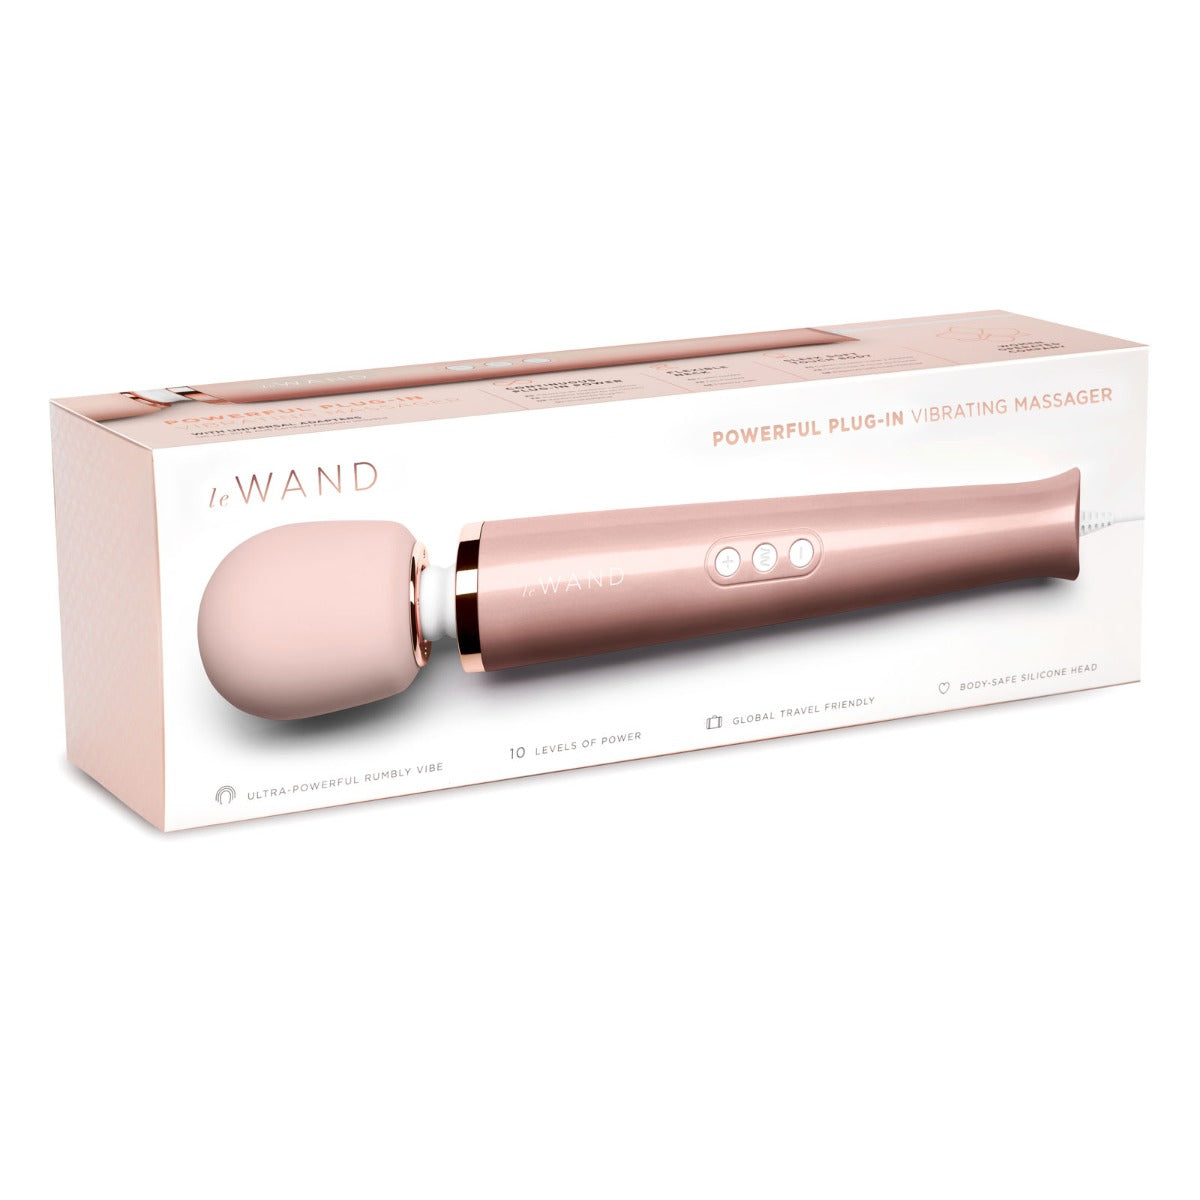 Le Wand | Powerful Plug-In Vibrating Massager Wand Rose - Gold